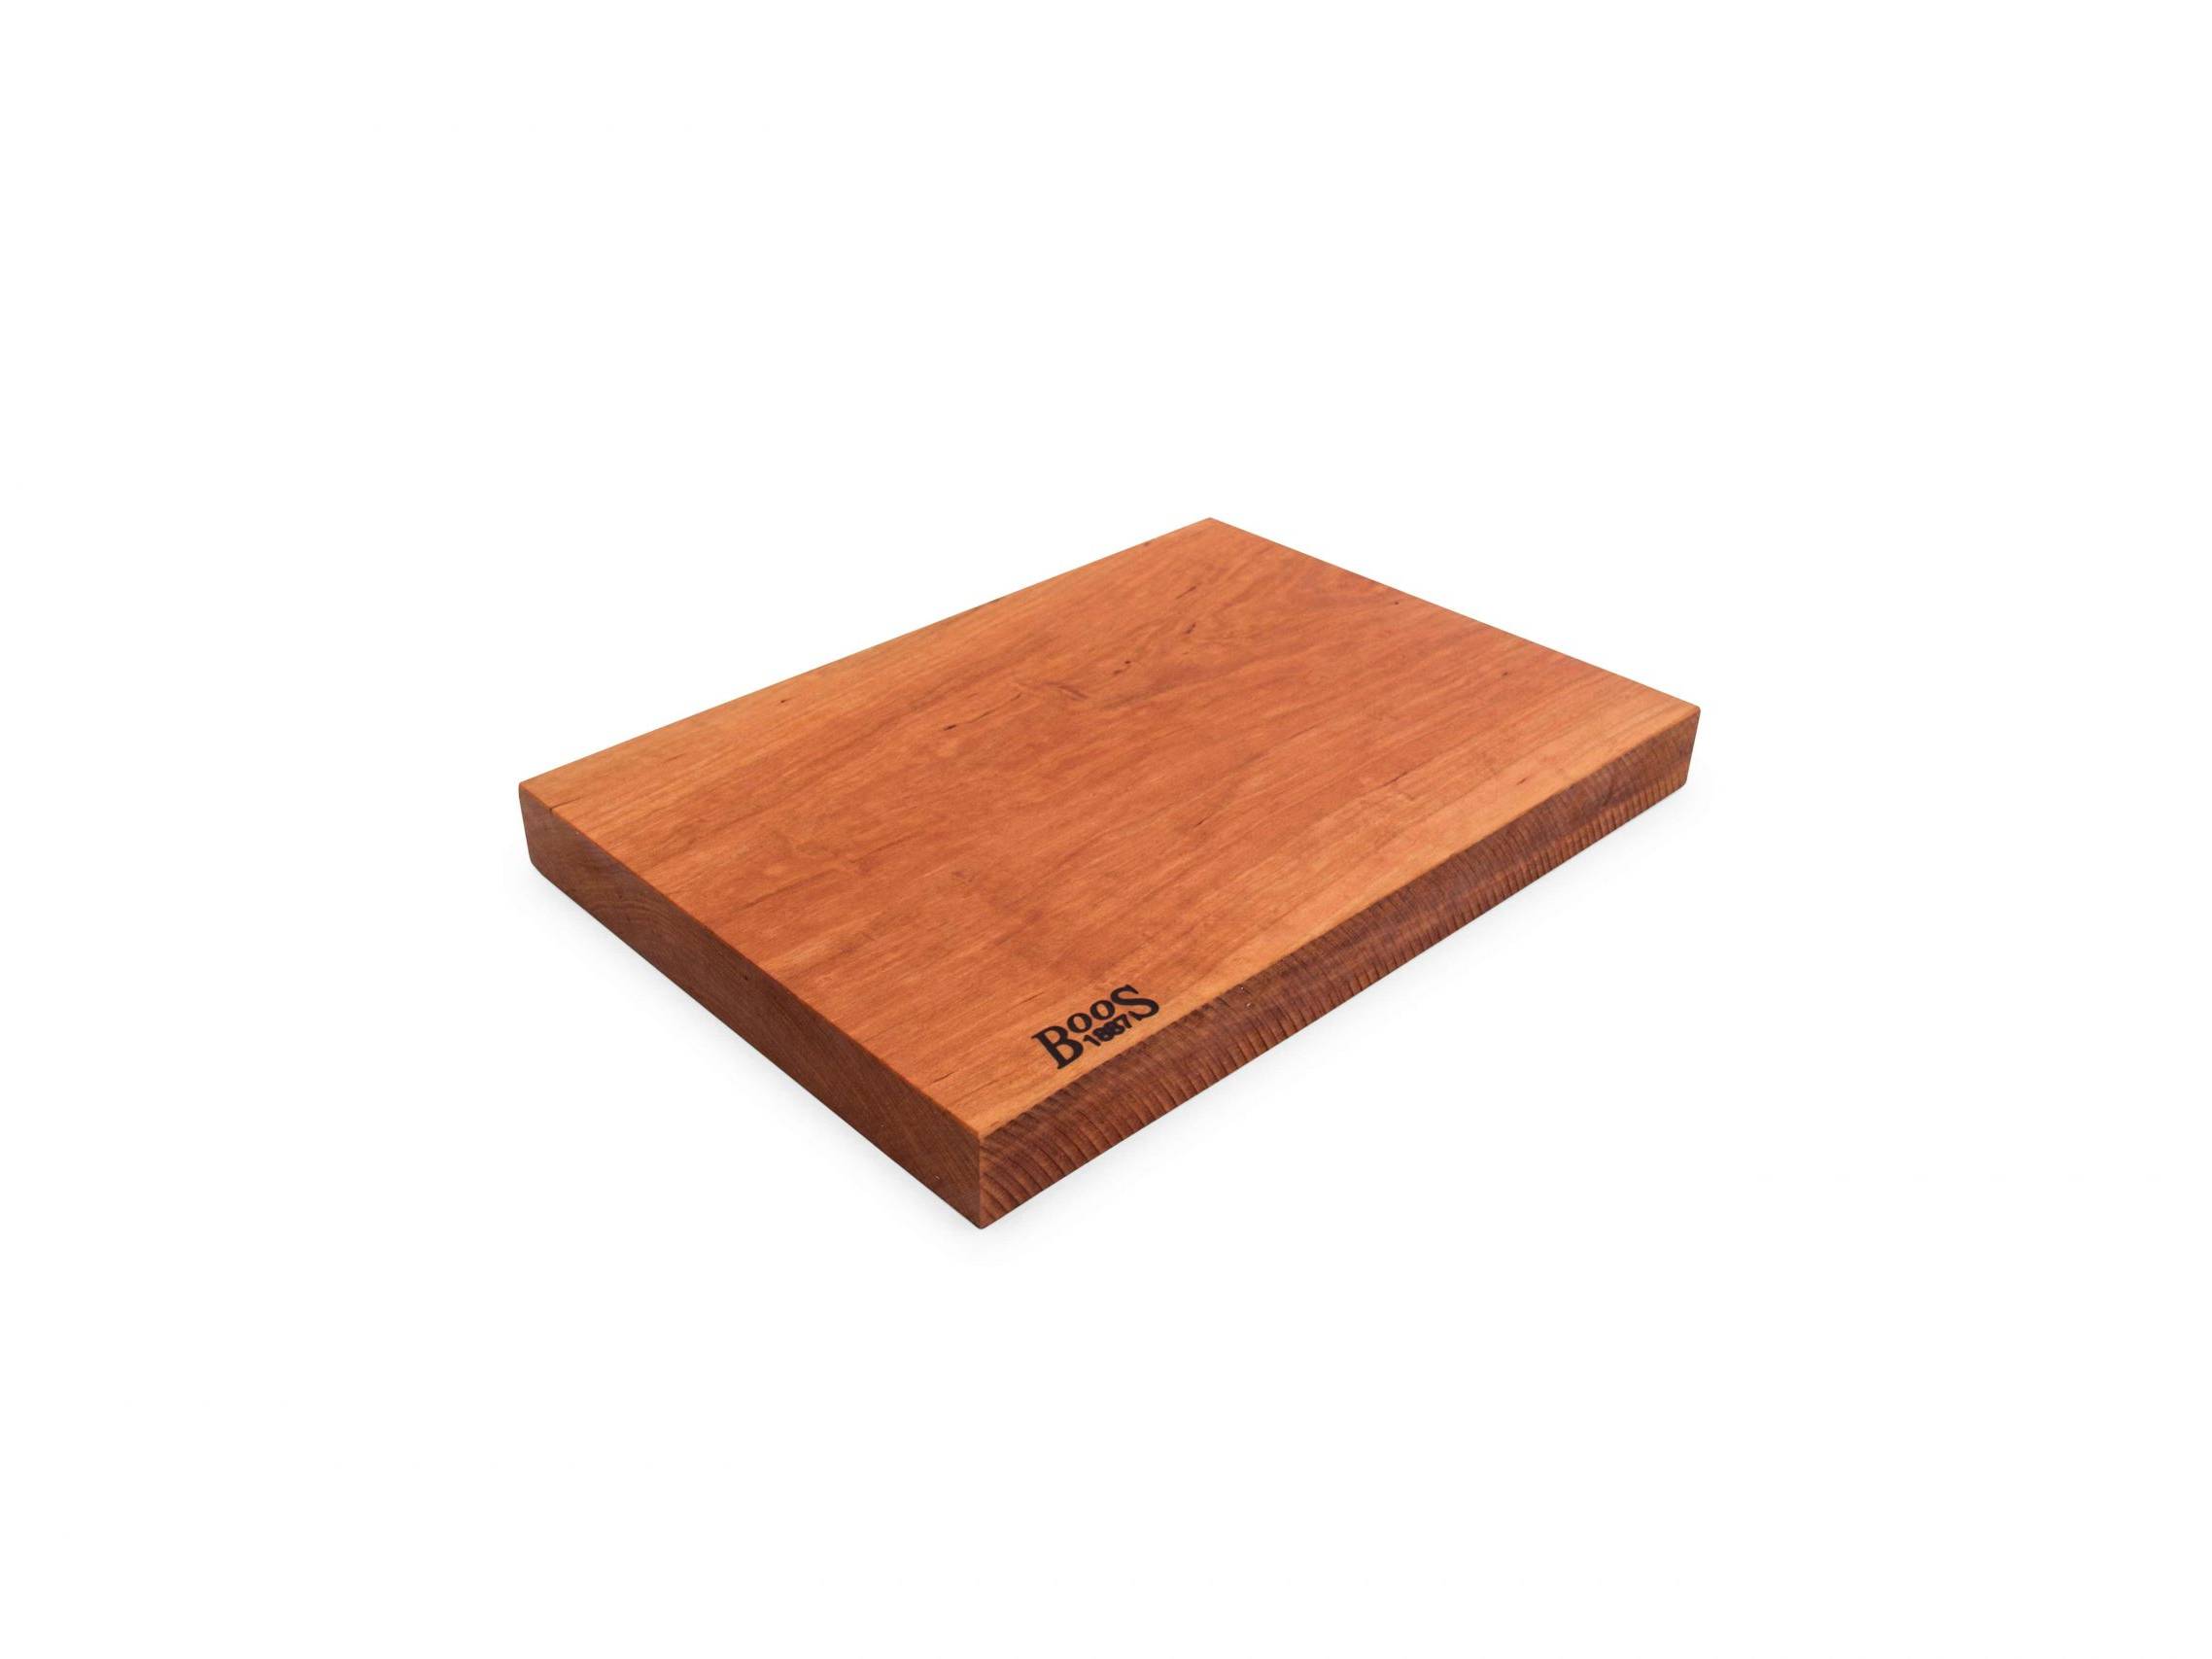 Boos 1887 / Rustic Edge one piece cutting board; American Cherry; can be used on both sides 67